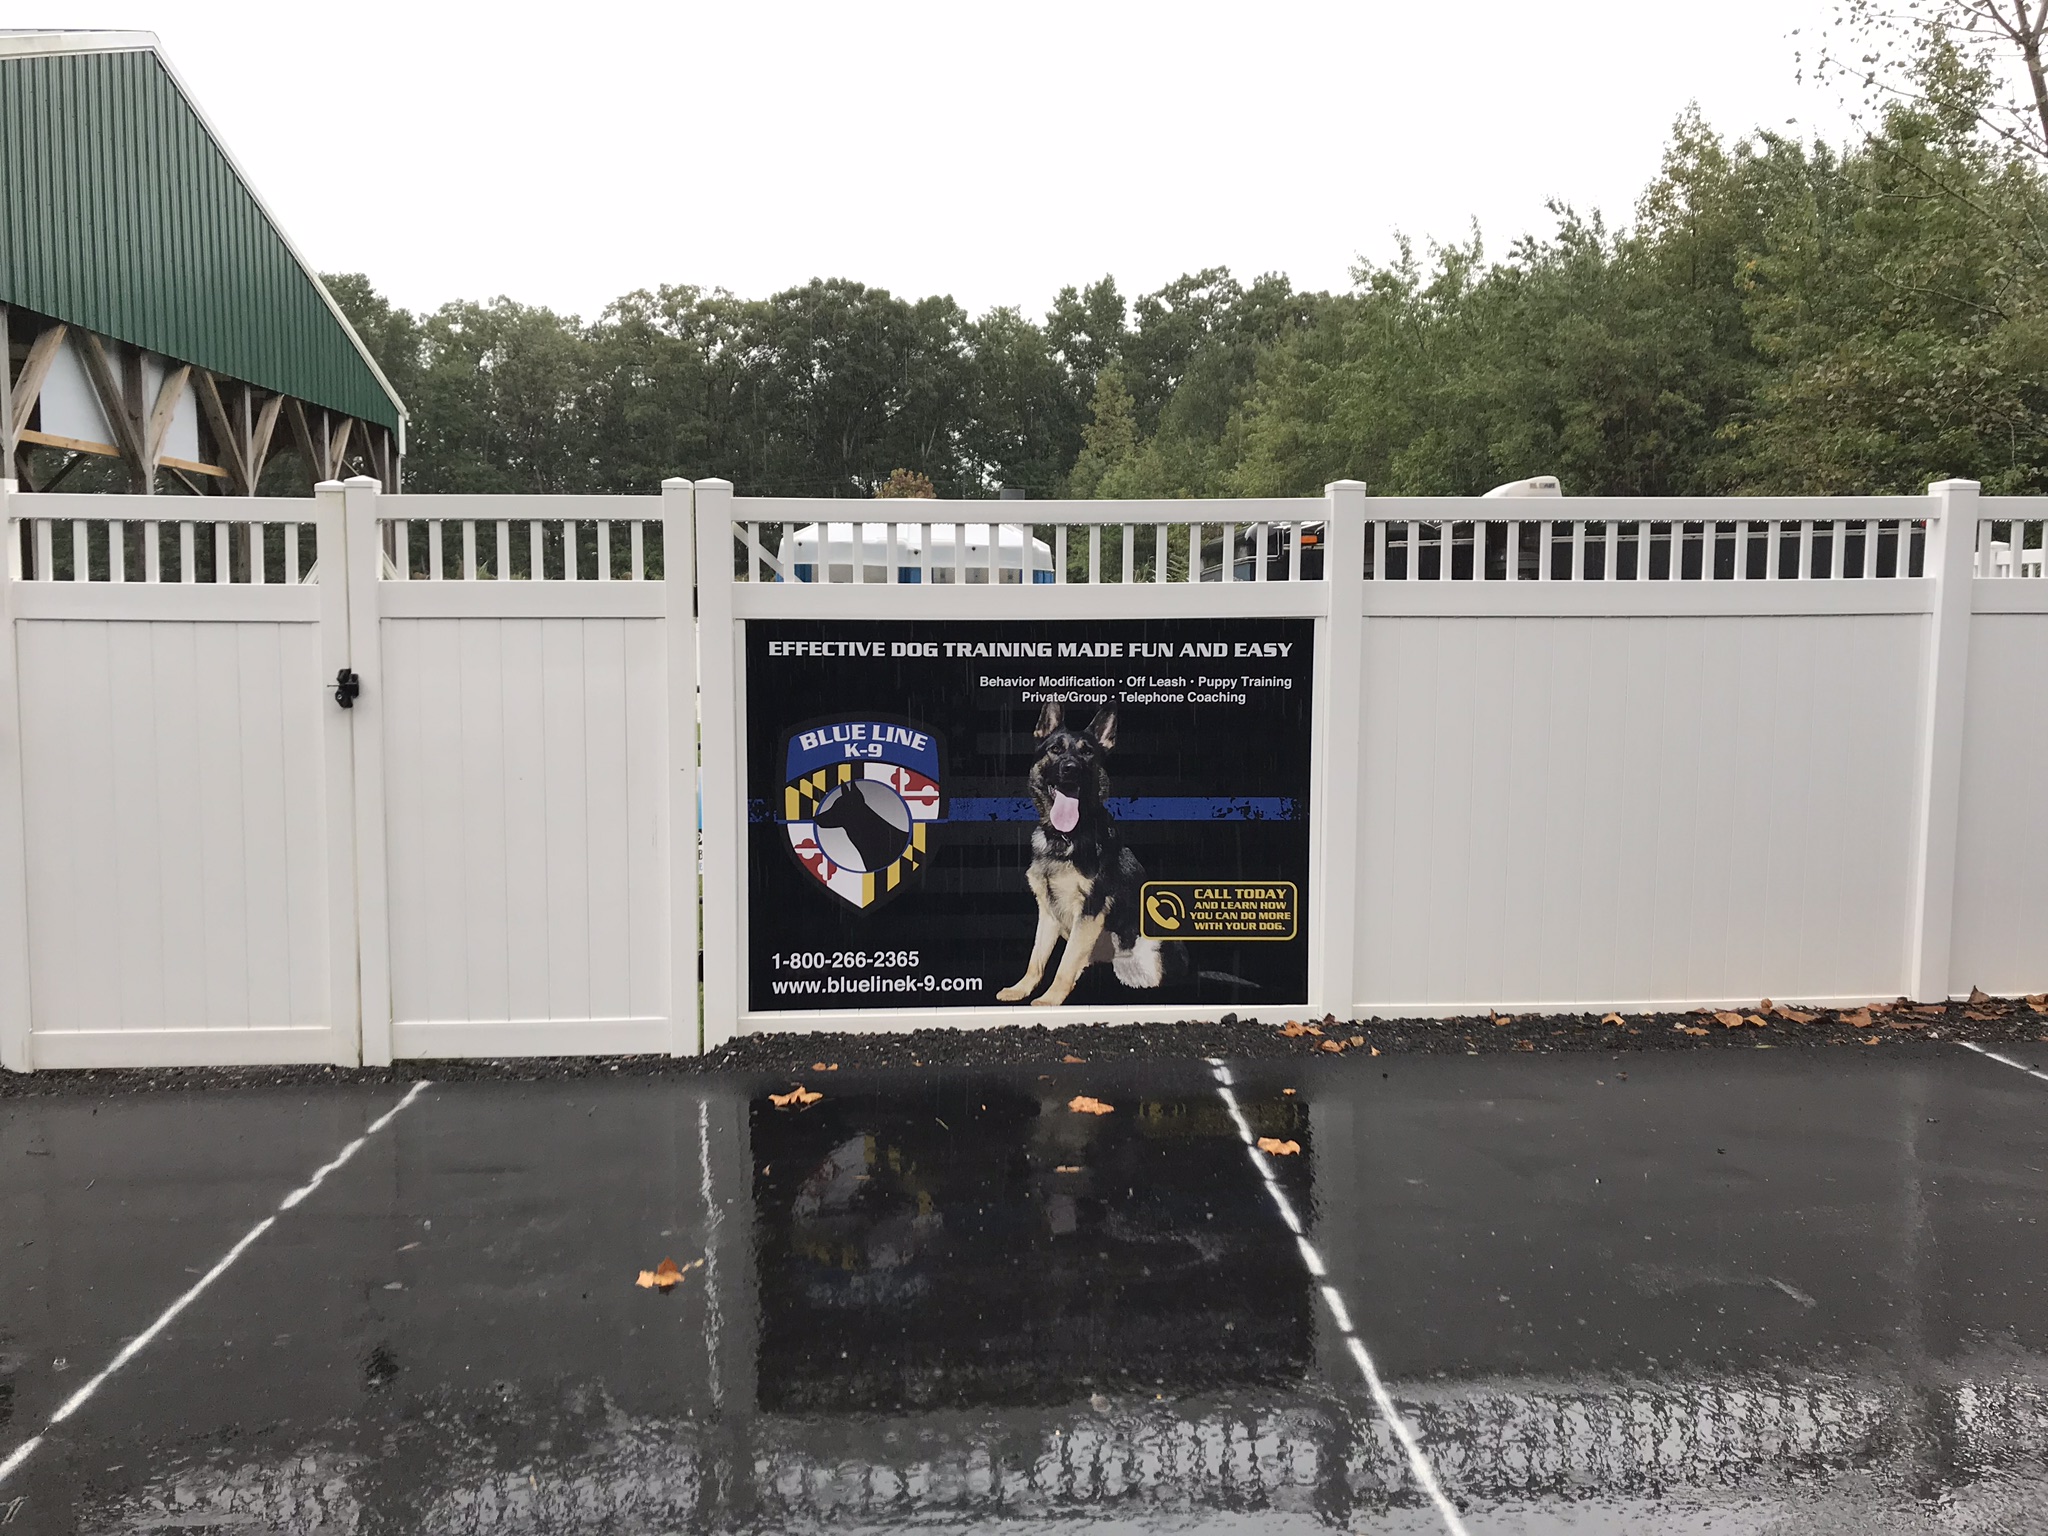 Outdoor sign on a white fence for Blue Line K-9 with image of German Shepherd and logo 